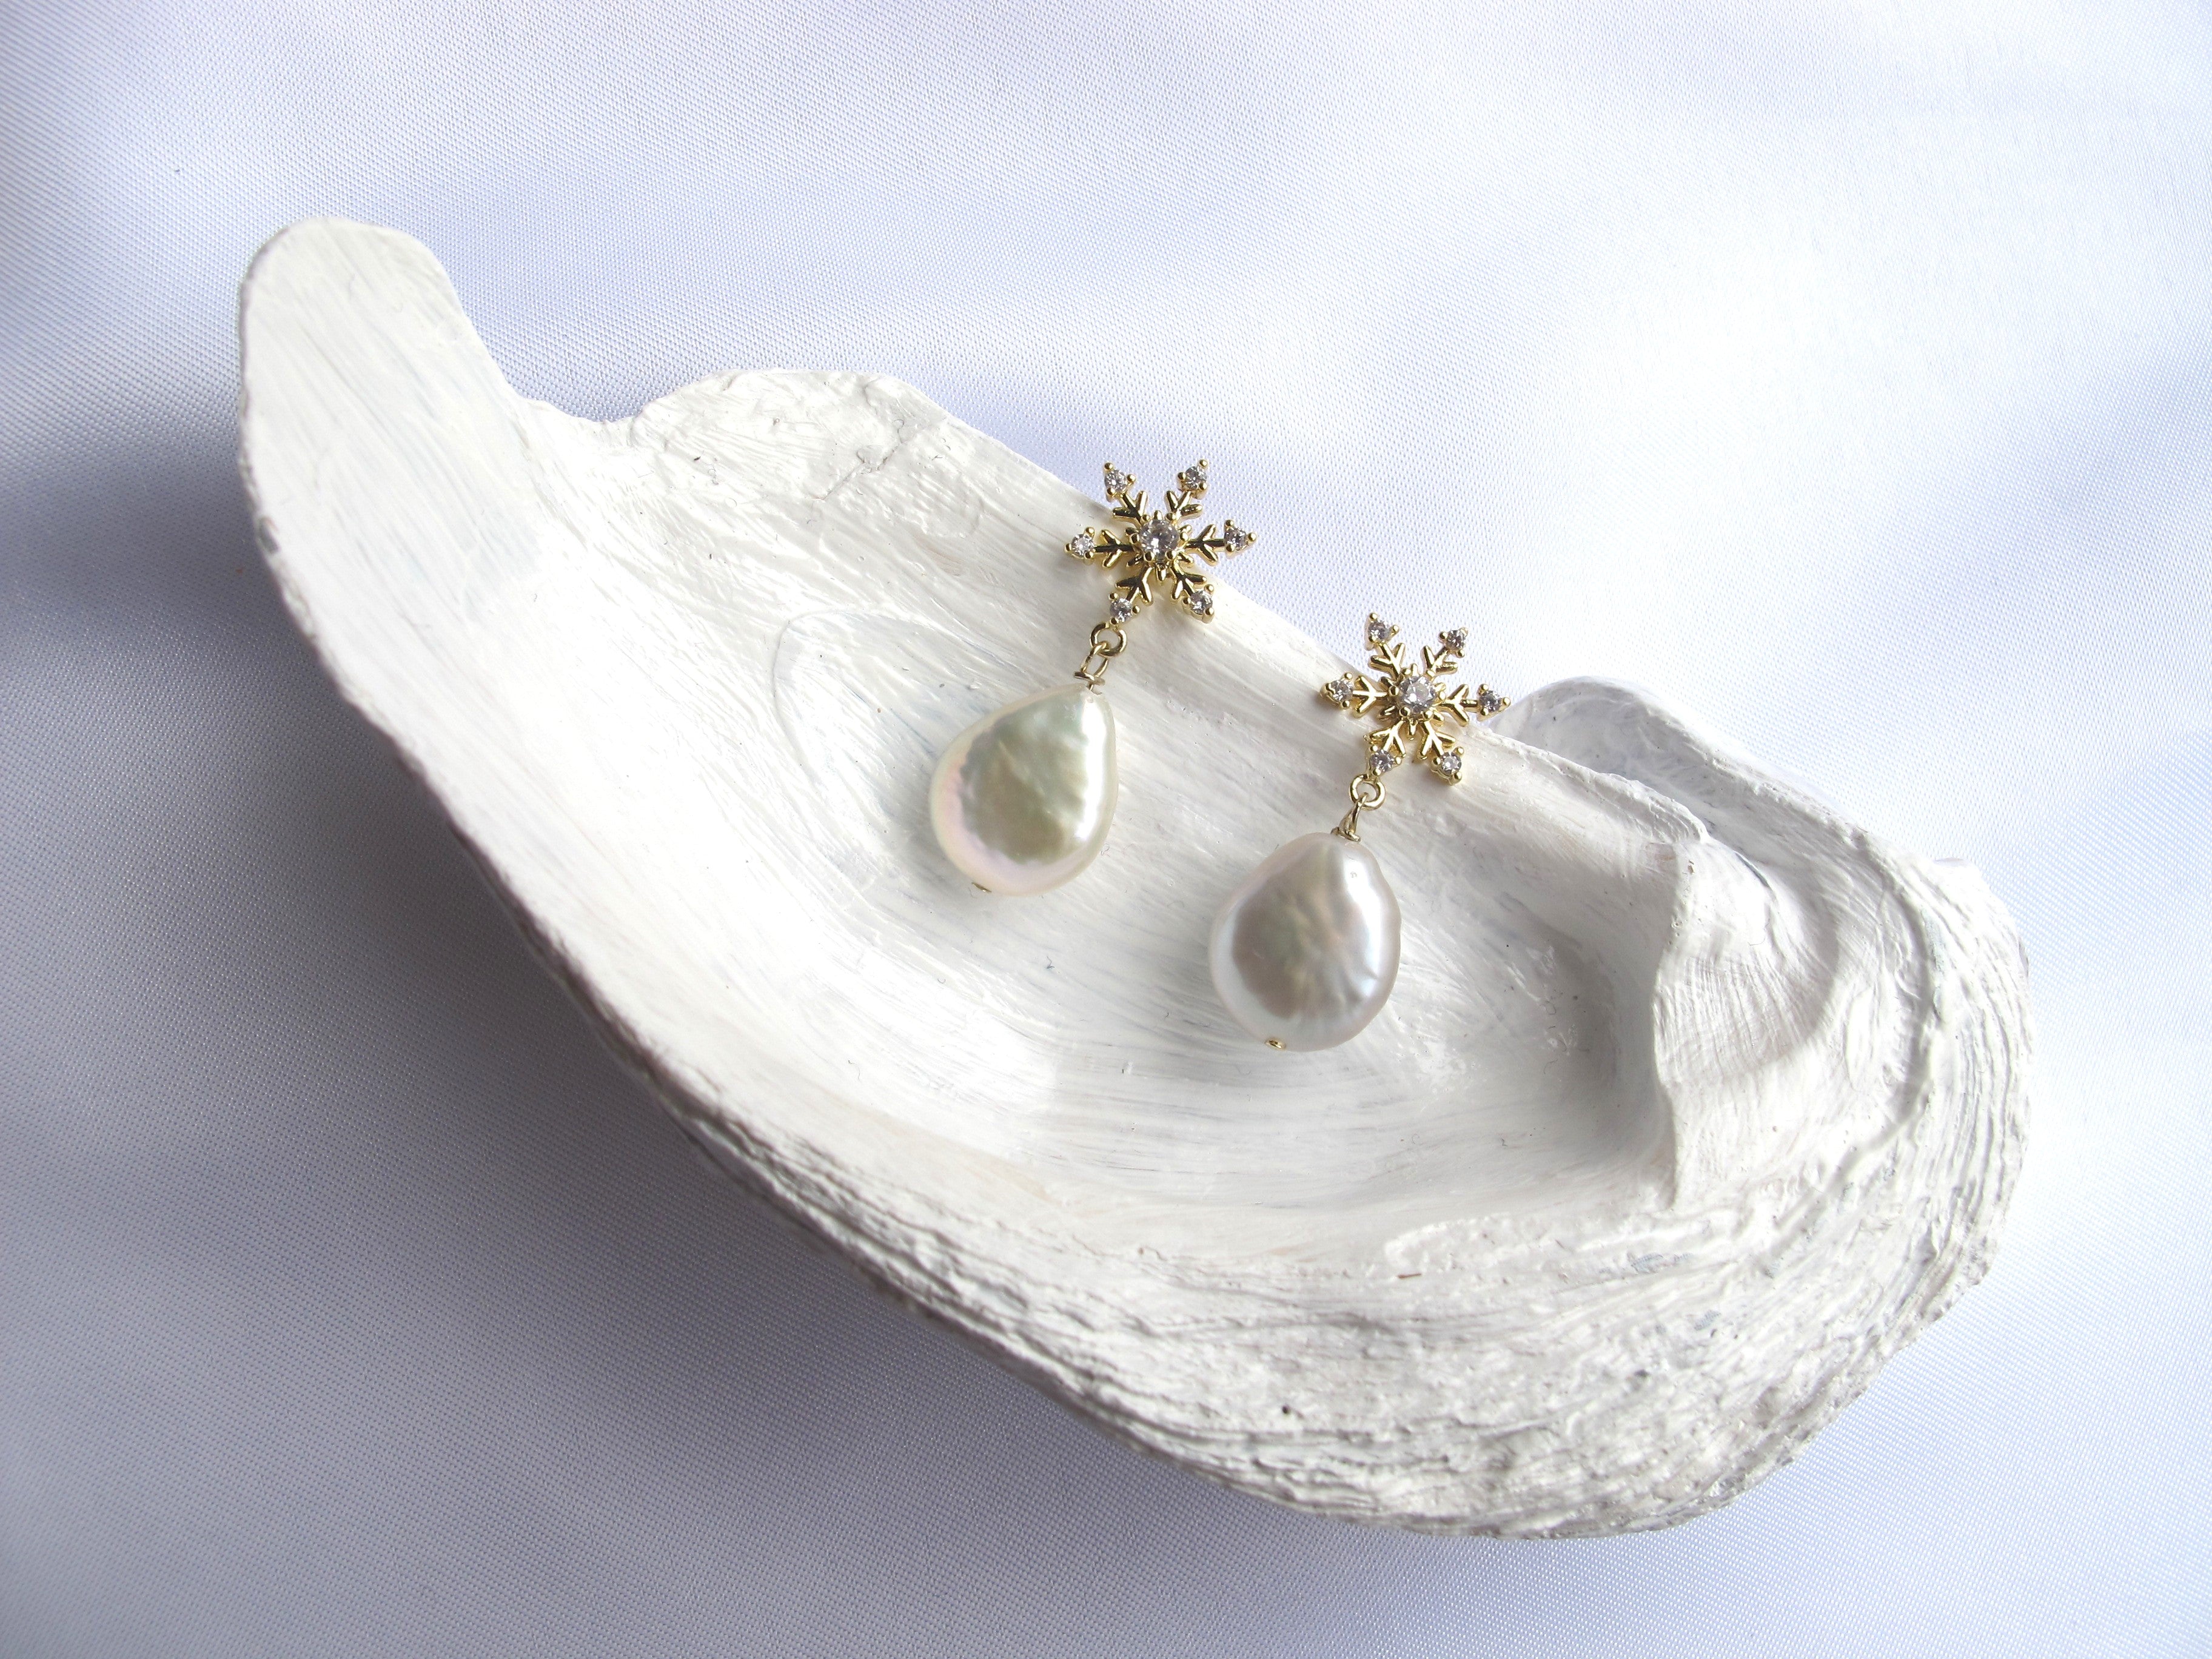 14k Gold fresh water pearls with snow flake earrings